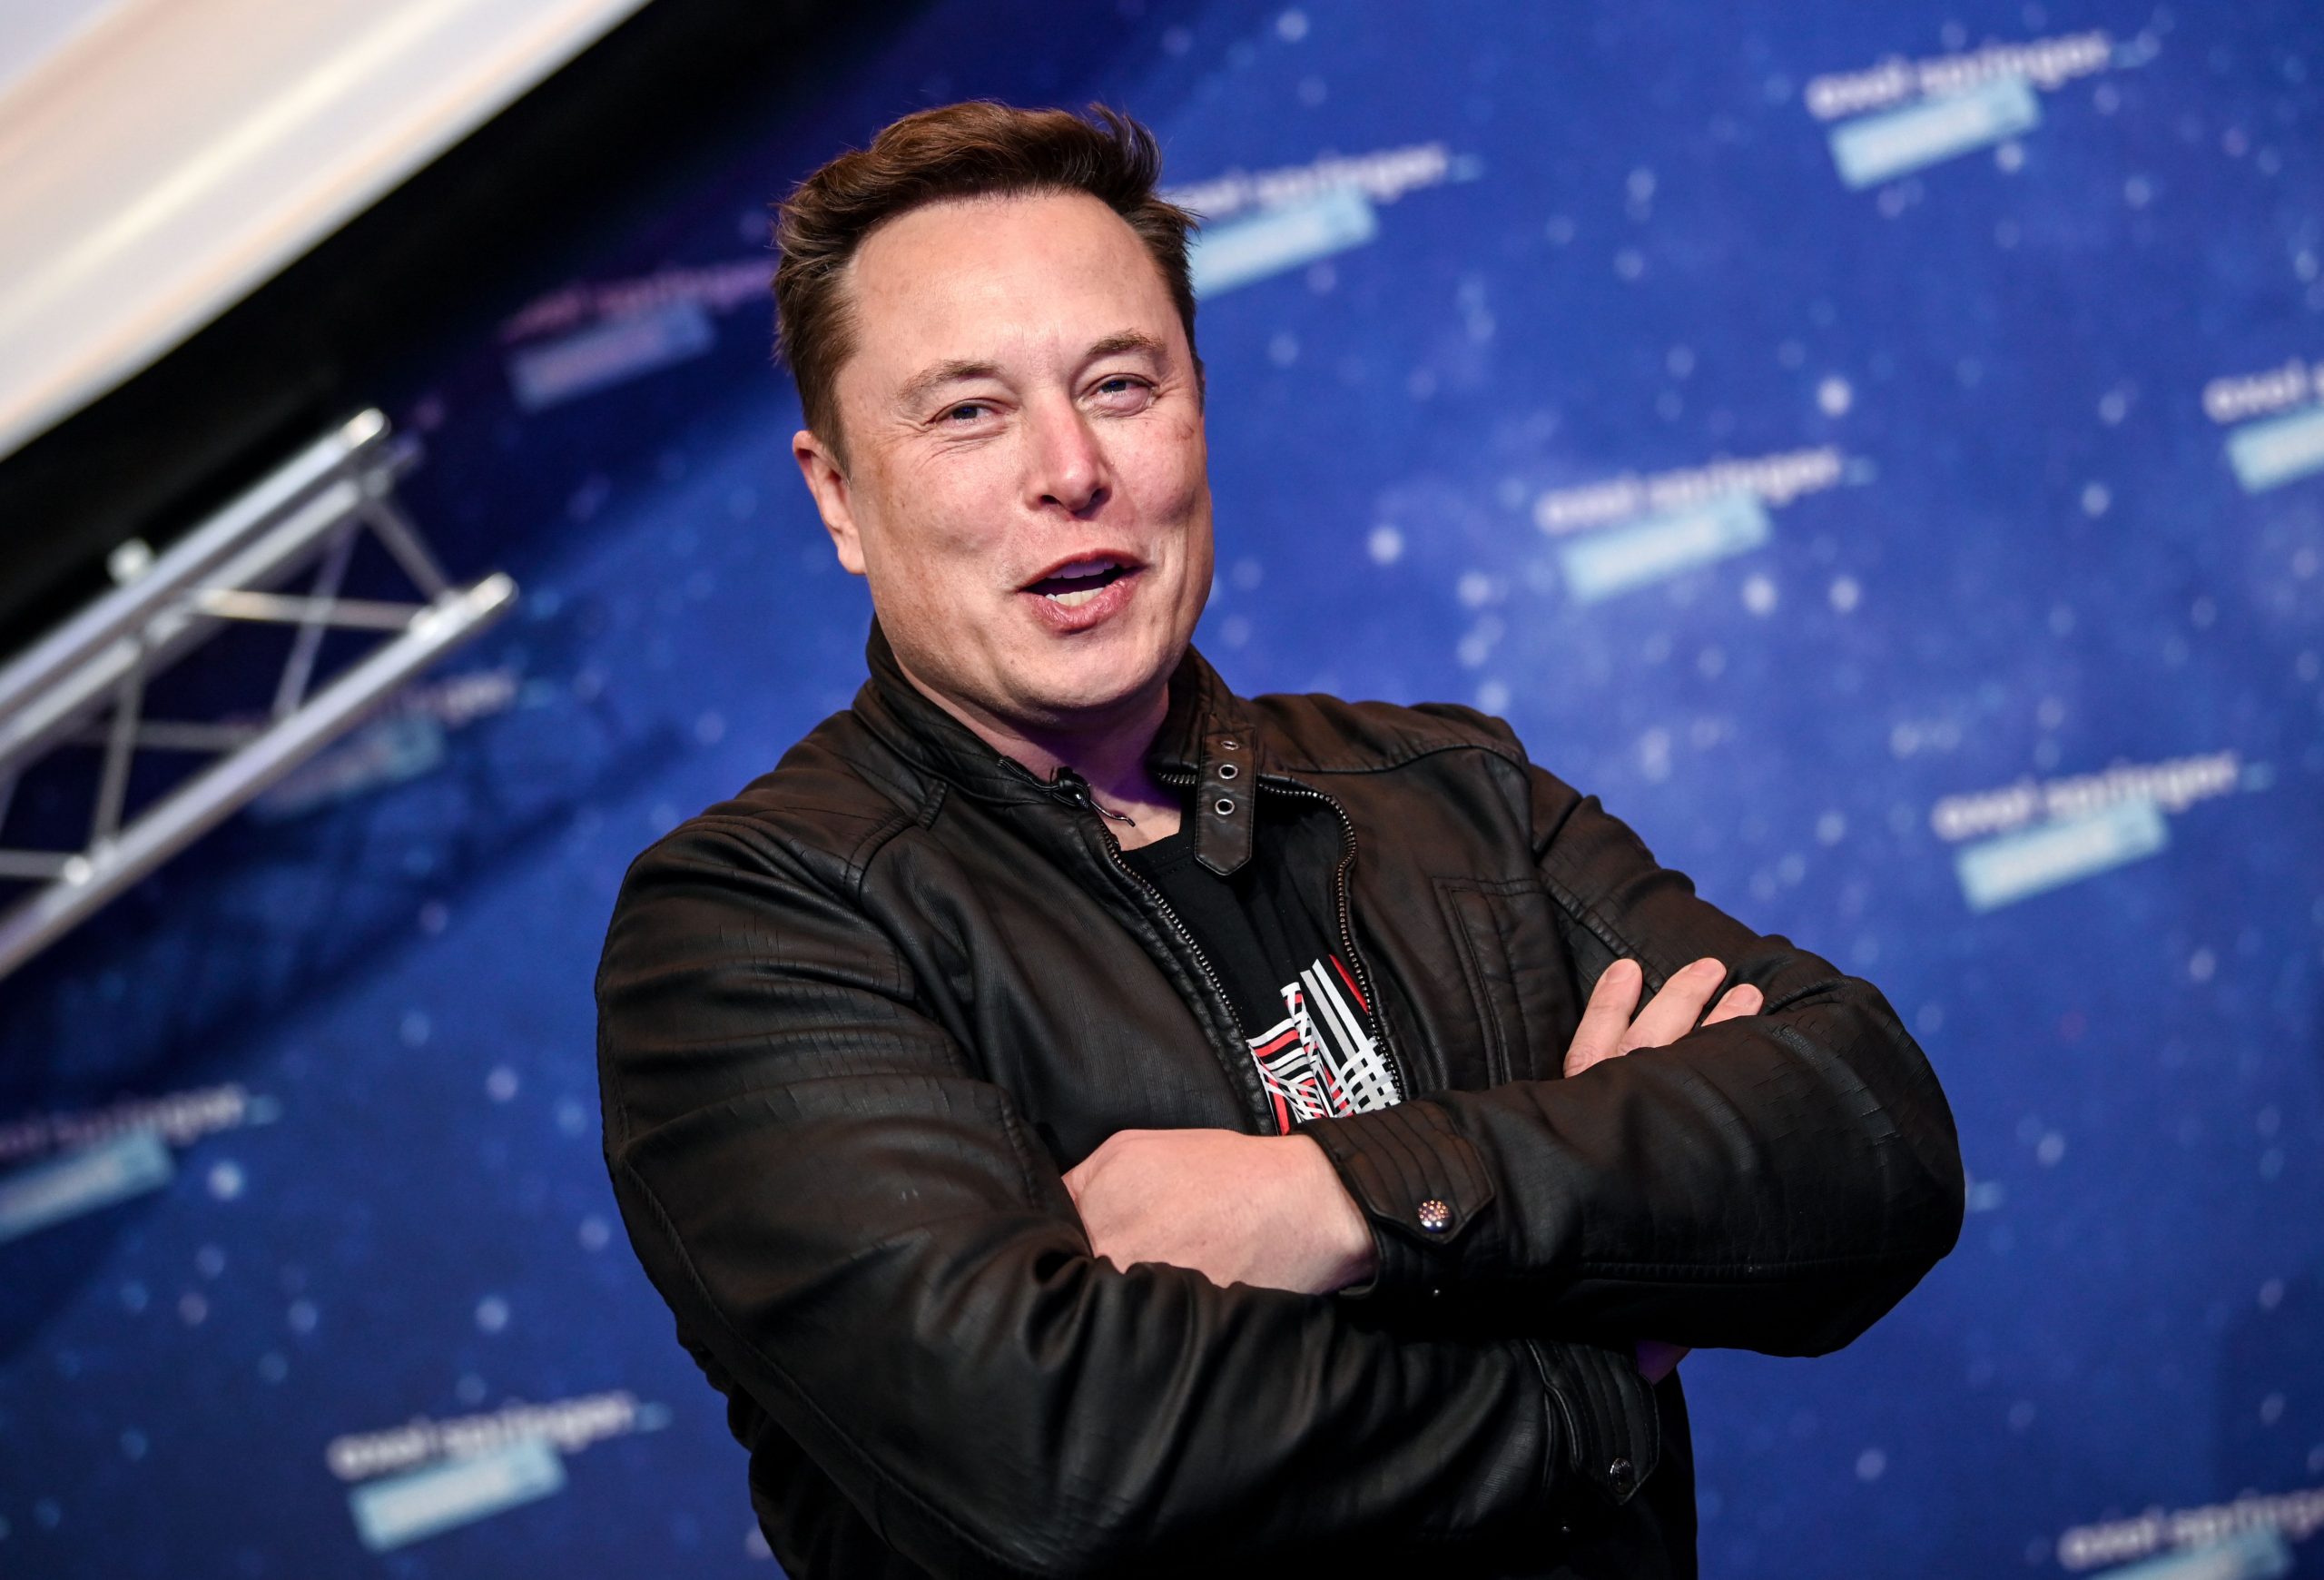 Elon Musk smiles for a photo on the red carpet